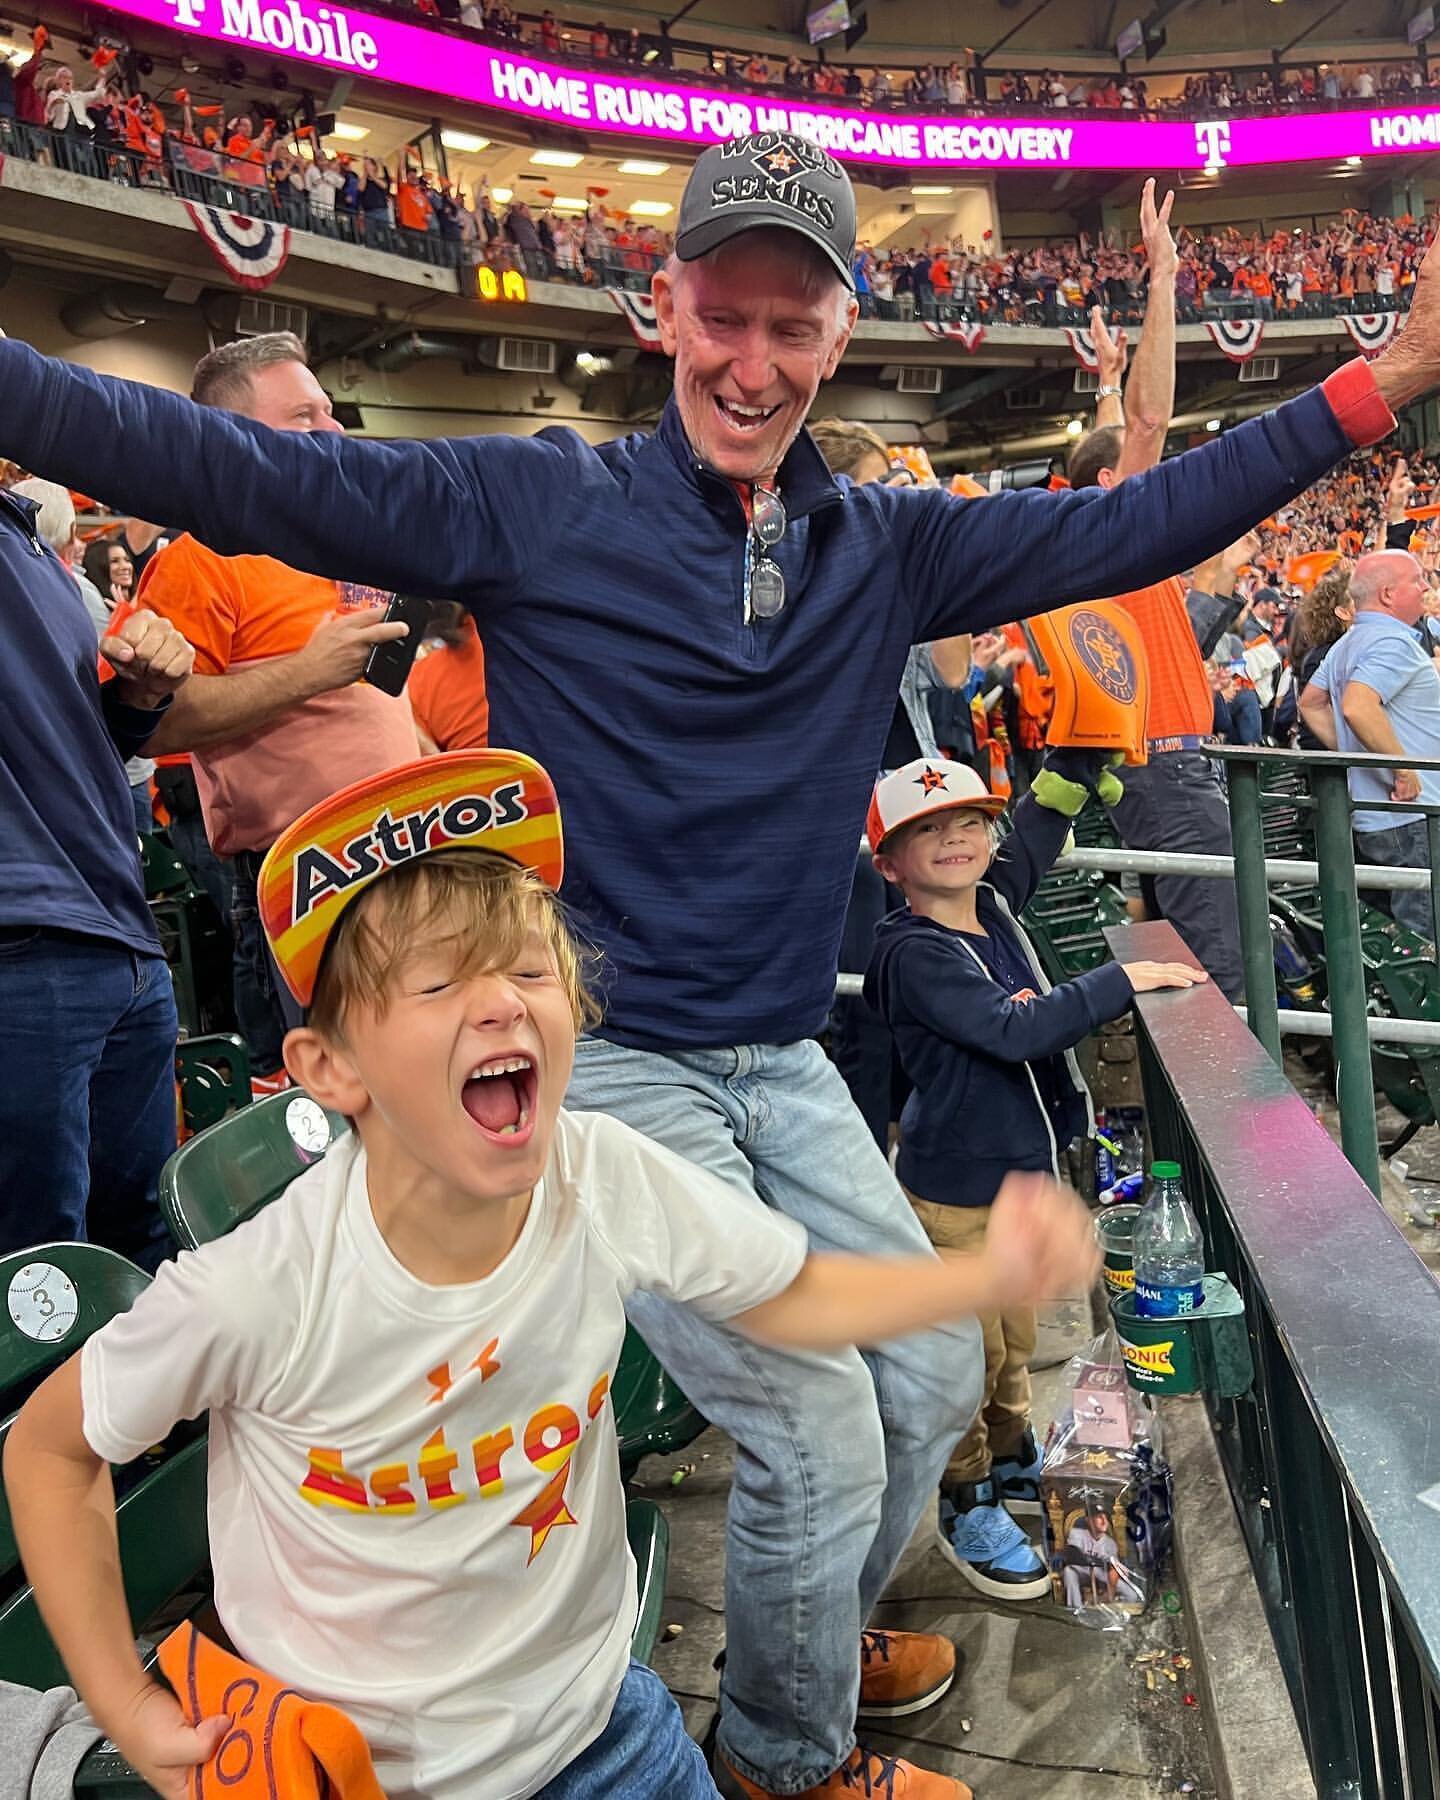 It feels so good to be #1 ! 
Photo of my Nephews and Dad expressing that winning feeling courtesy of @krysycranethomp and @gbo30 says it all. #goastros🧡🚀 #worldseries #champions #houston #worldserieschampionship2022